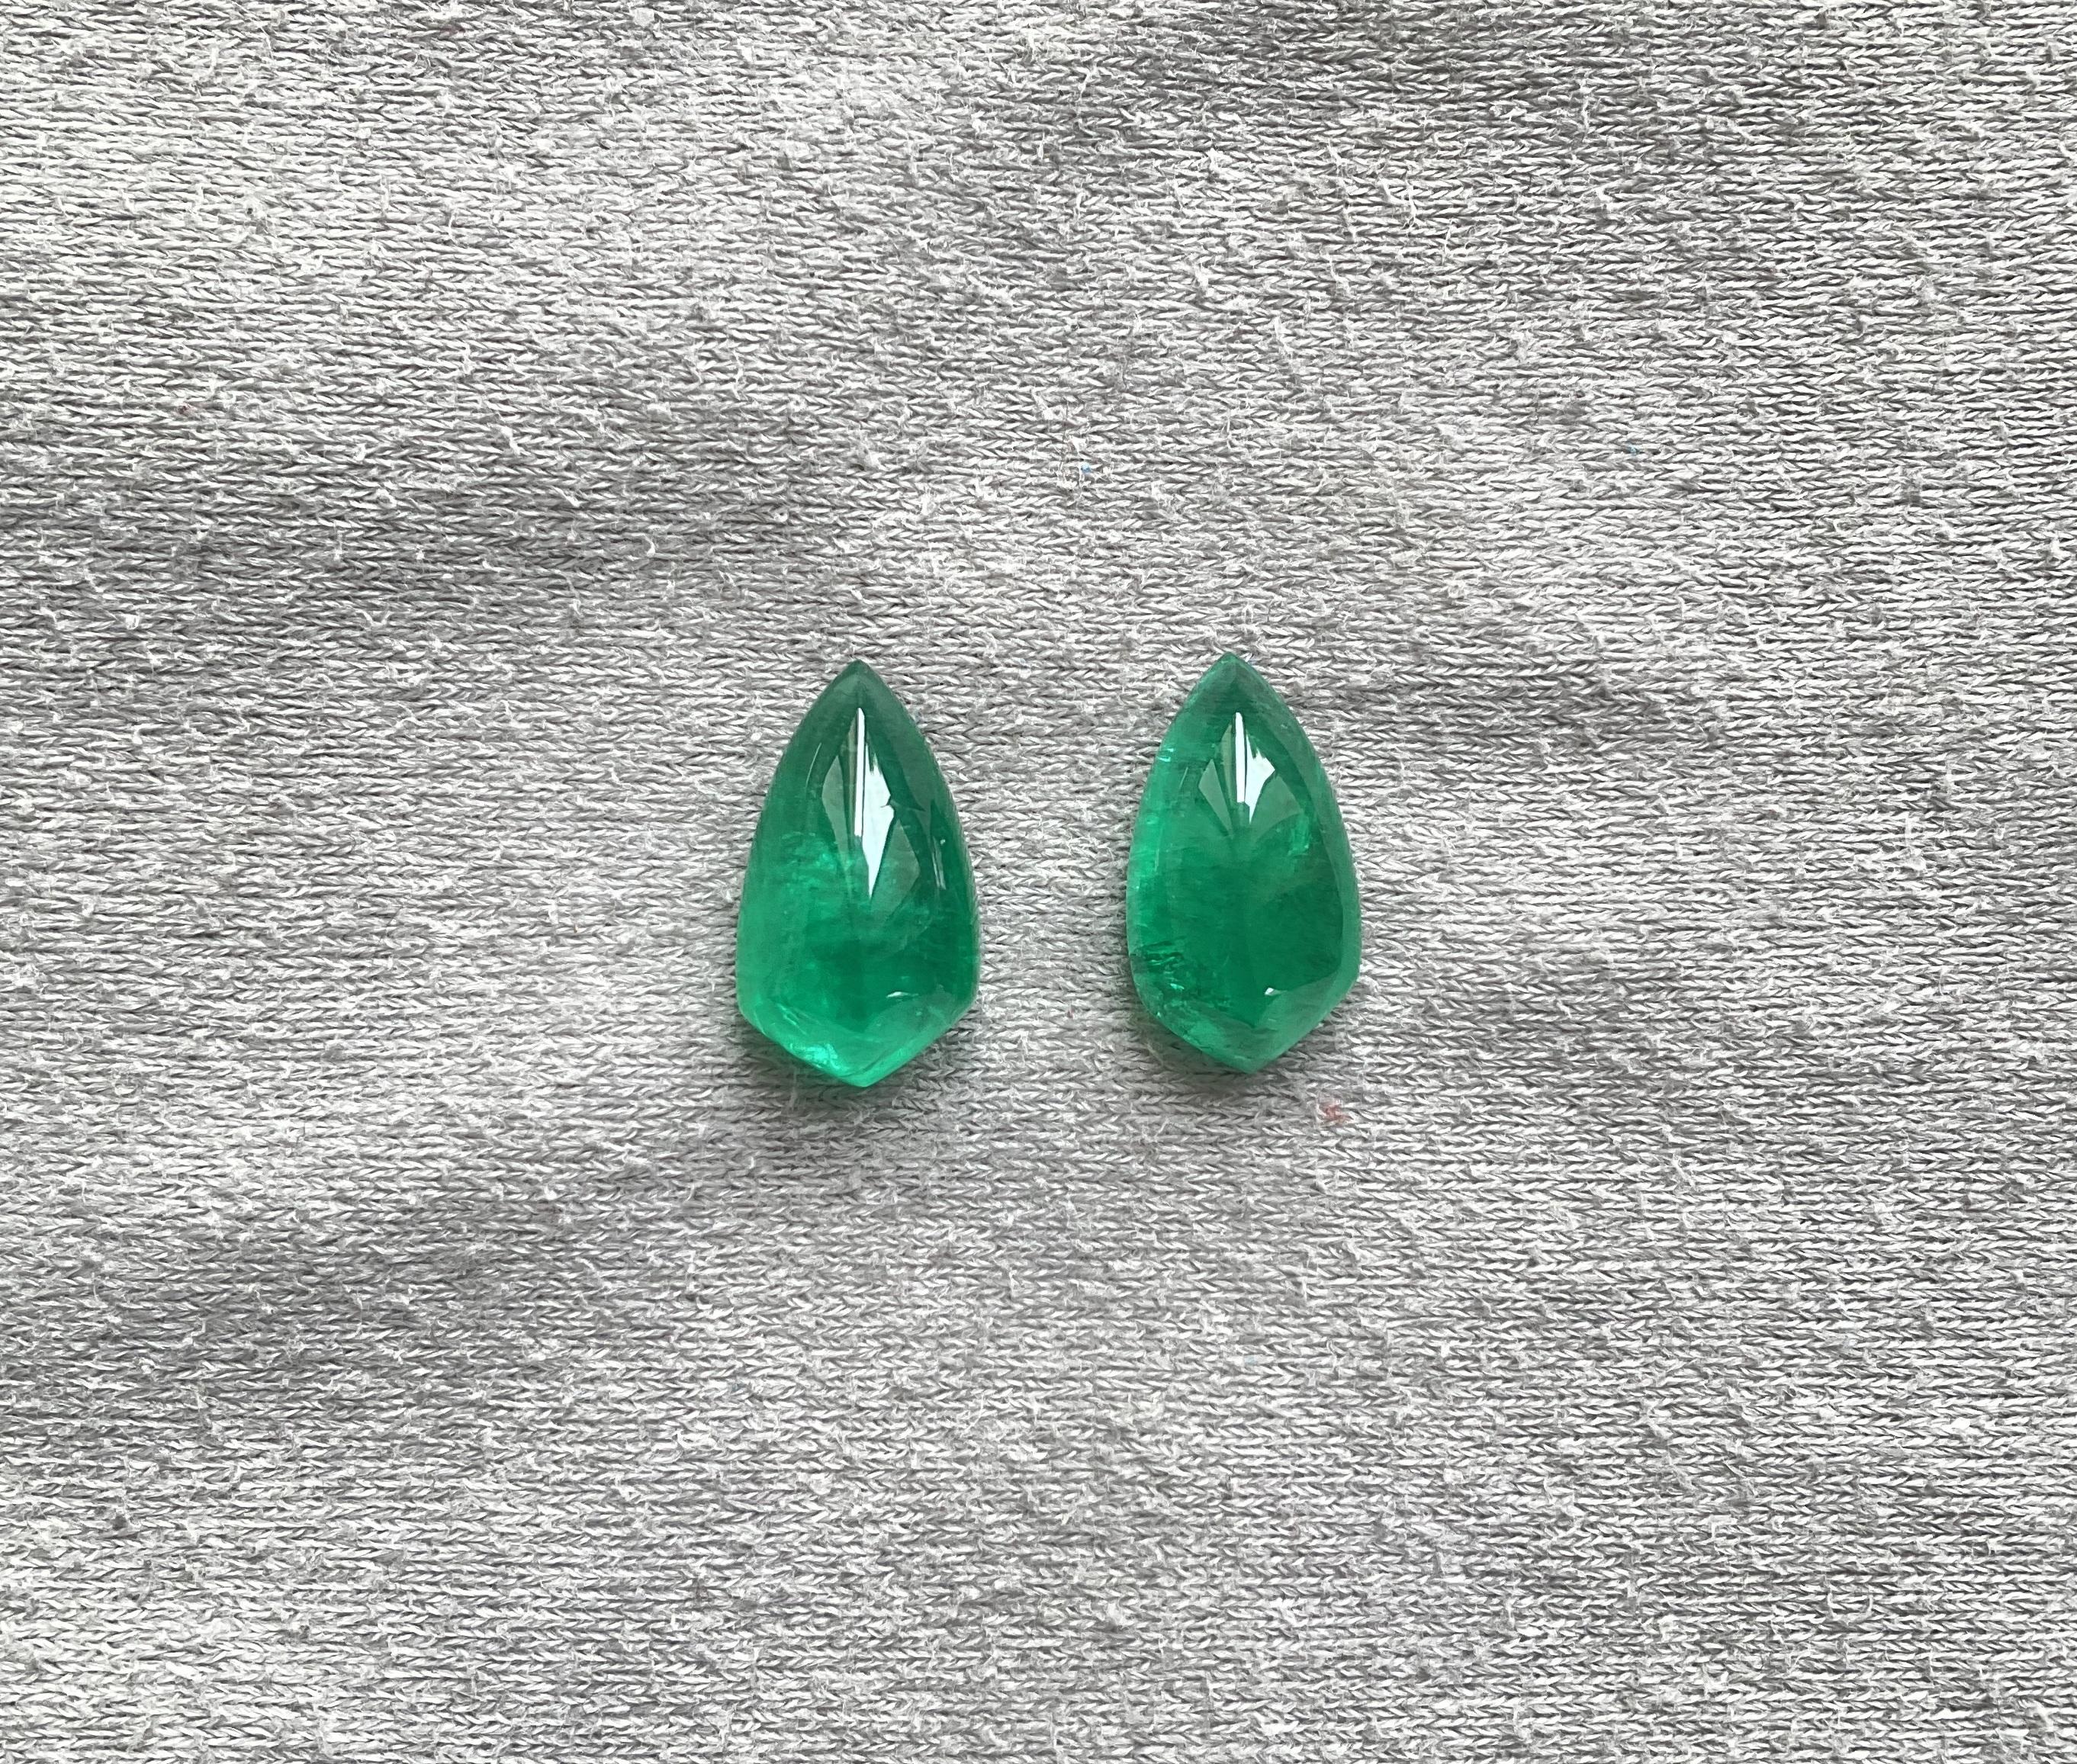 11.50 Carats Zambian Emerald Shield Pair Top Quality For Earrings Natural Gem For Sale 1